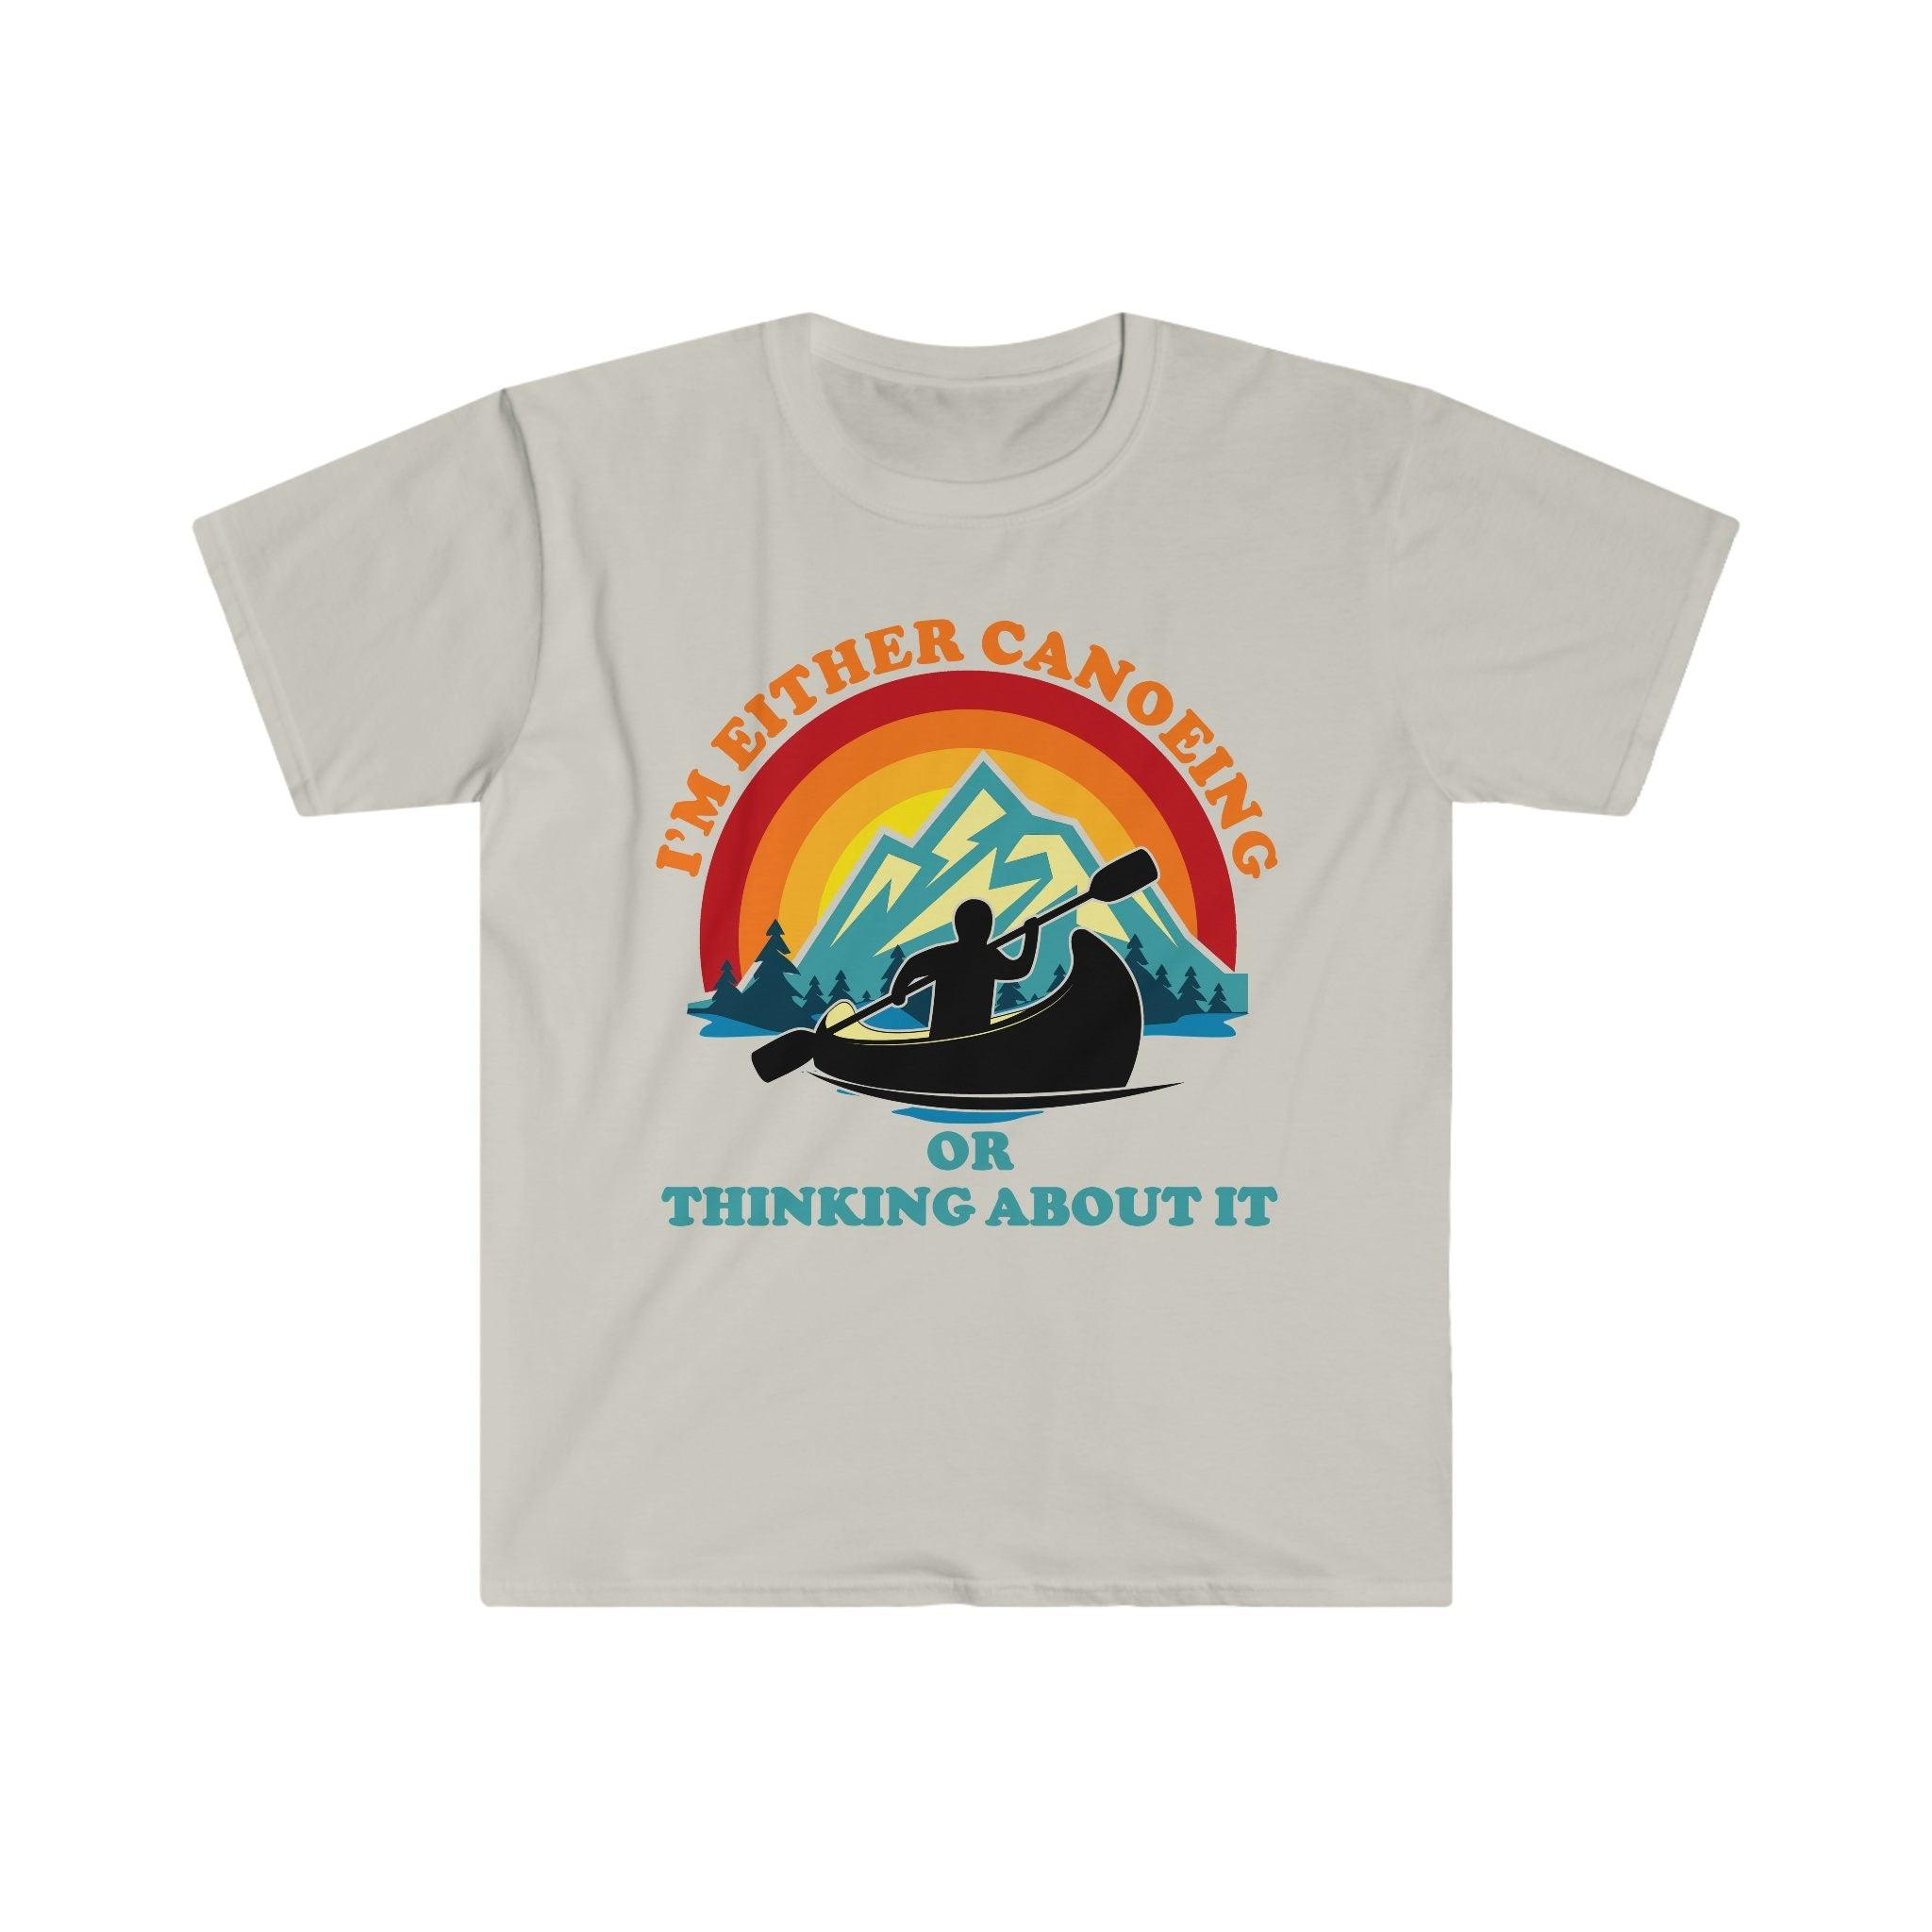 I'M Either Canoeing Or Thinking About It Retro Sunset,Retro Sunset Canoe Shirt  Kayak Shirt, Kayaking Gift, Canoe Shirt, Canoeing Gift - plusminusco.com